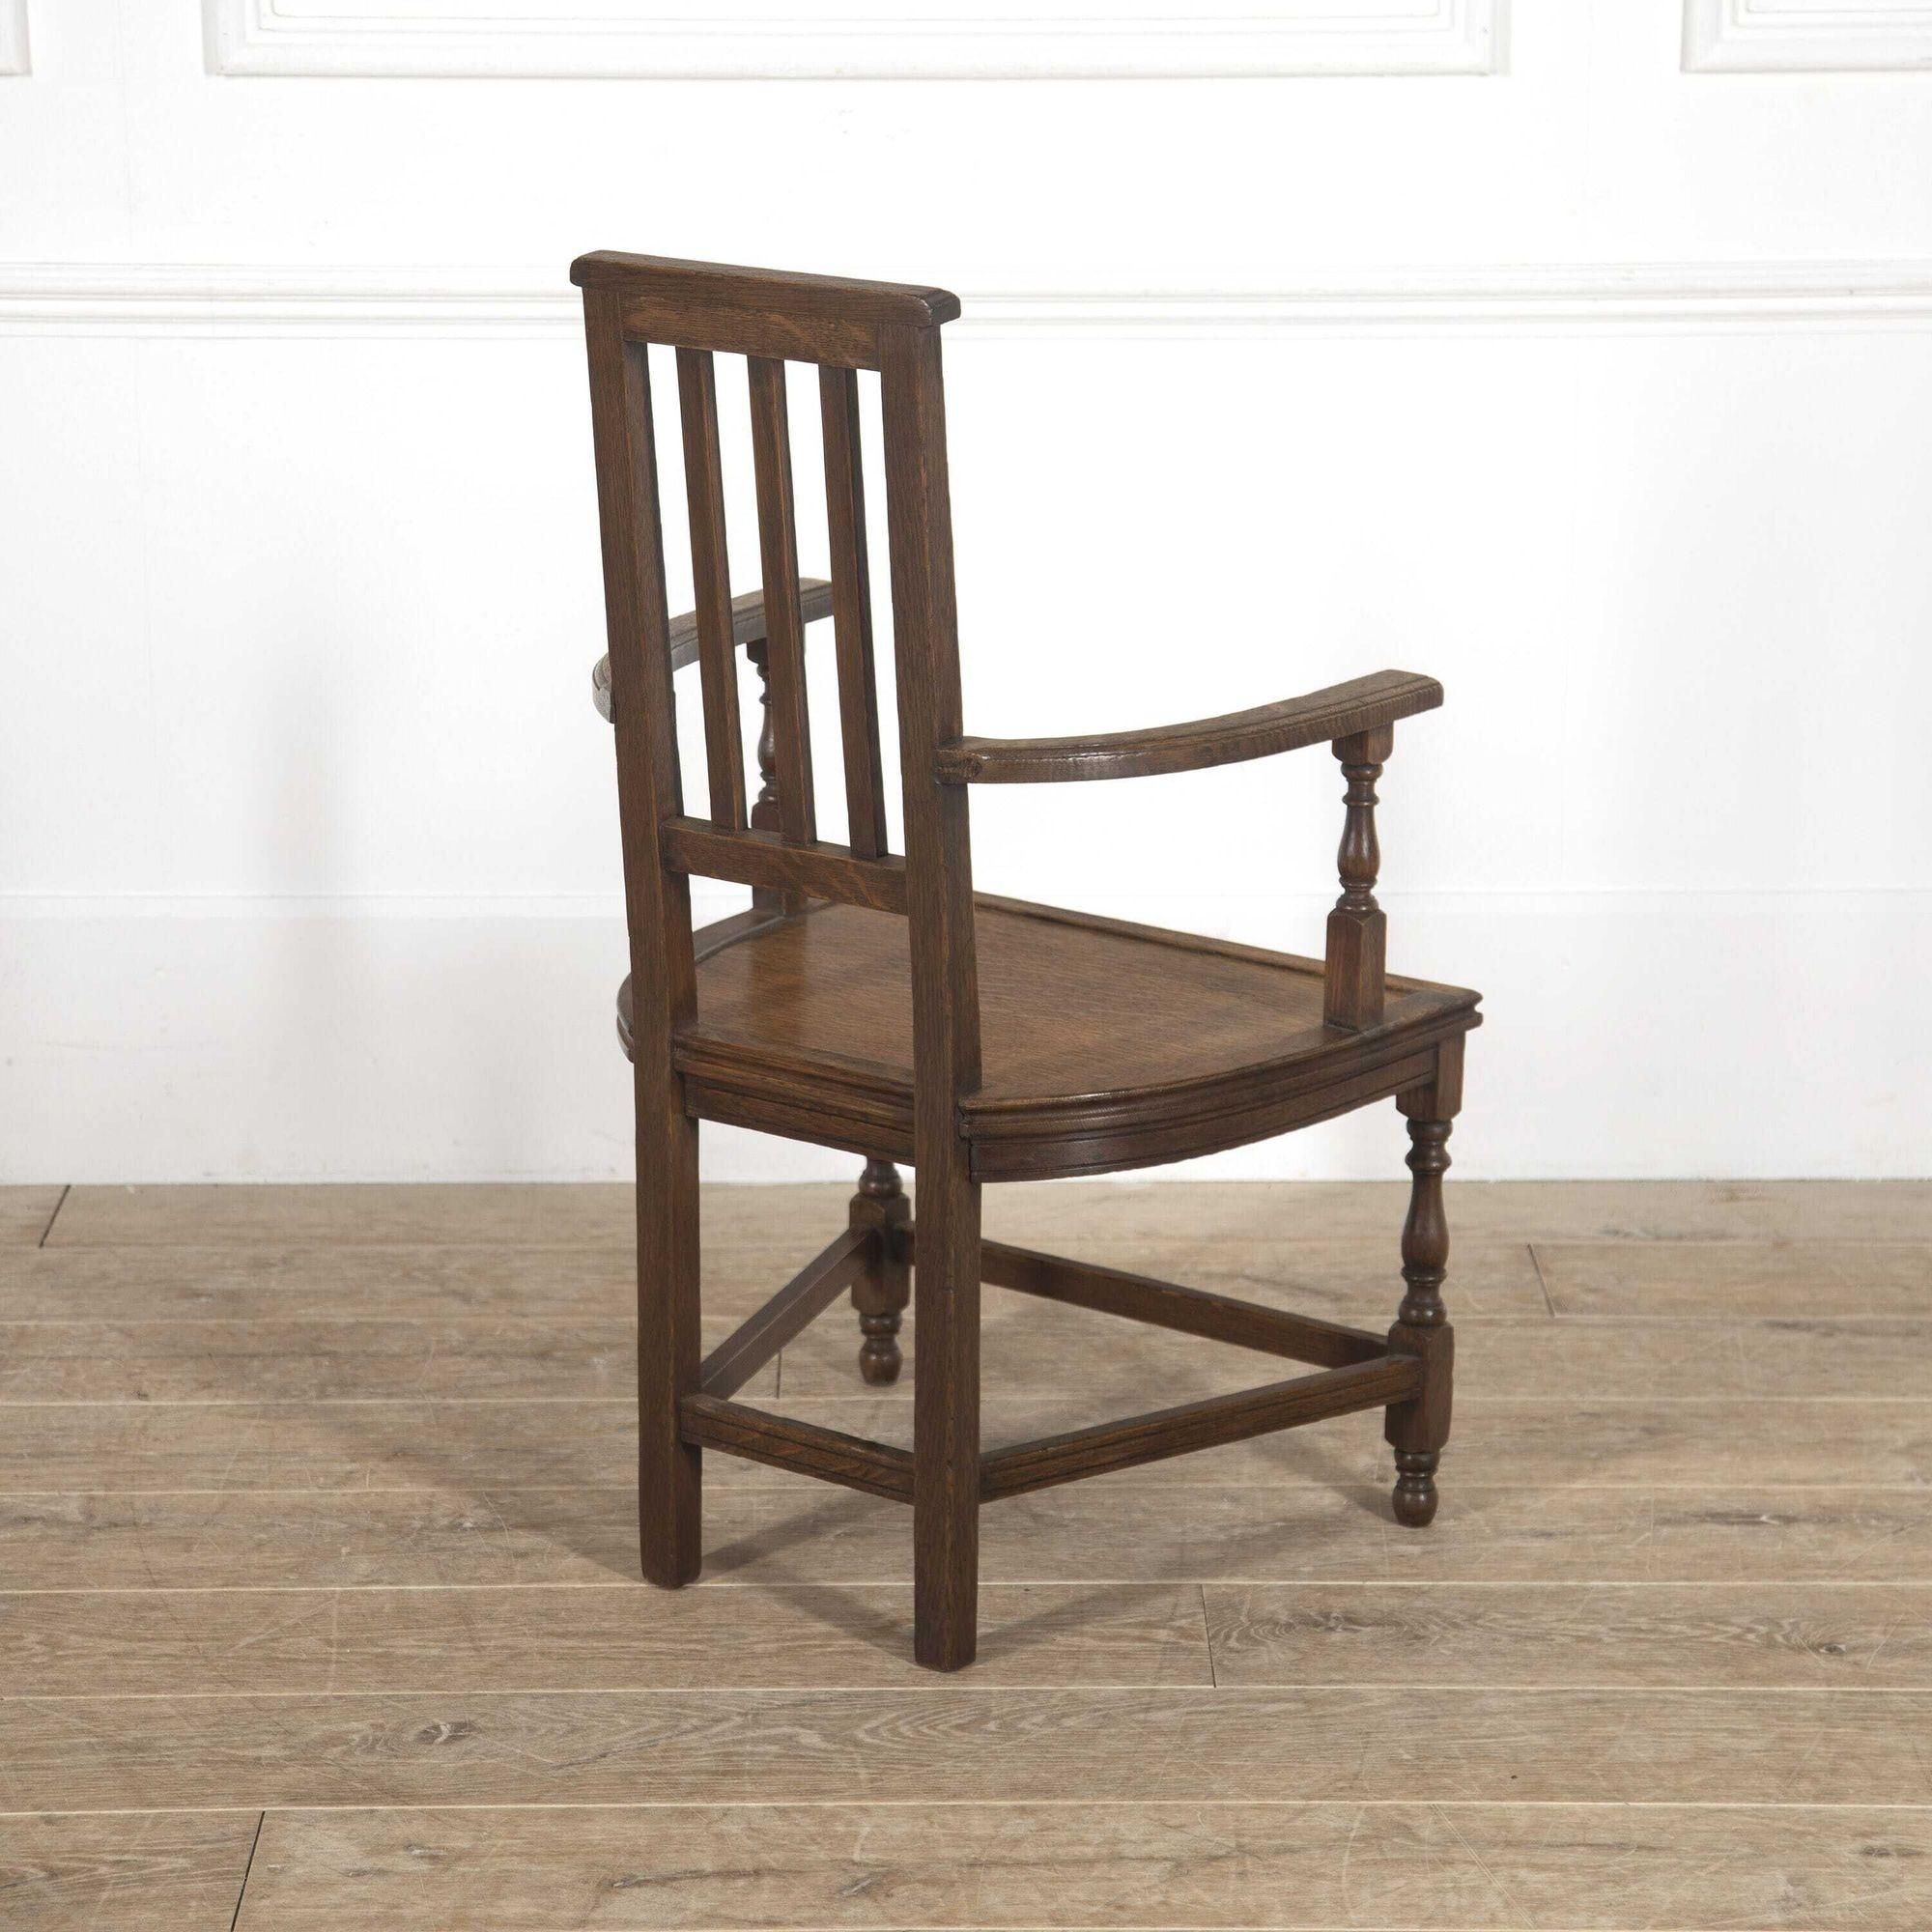 Oak Shakespeare chair, designed by E.W. Godwin and manufactured by William Watt. Circa 1882. 
With wonderful curved armrests and a generous dished seat. The narrow rectilinear back with vertical splats.
This chair is supported on turned legs and